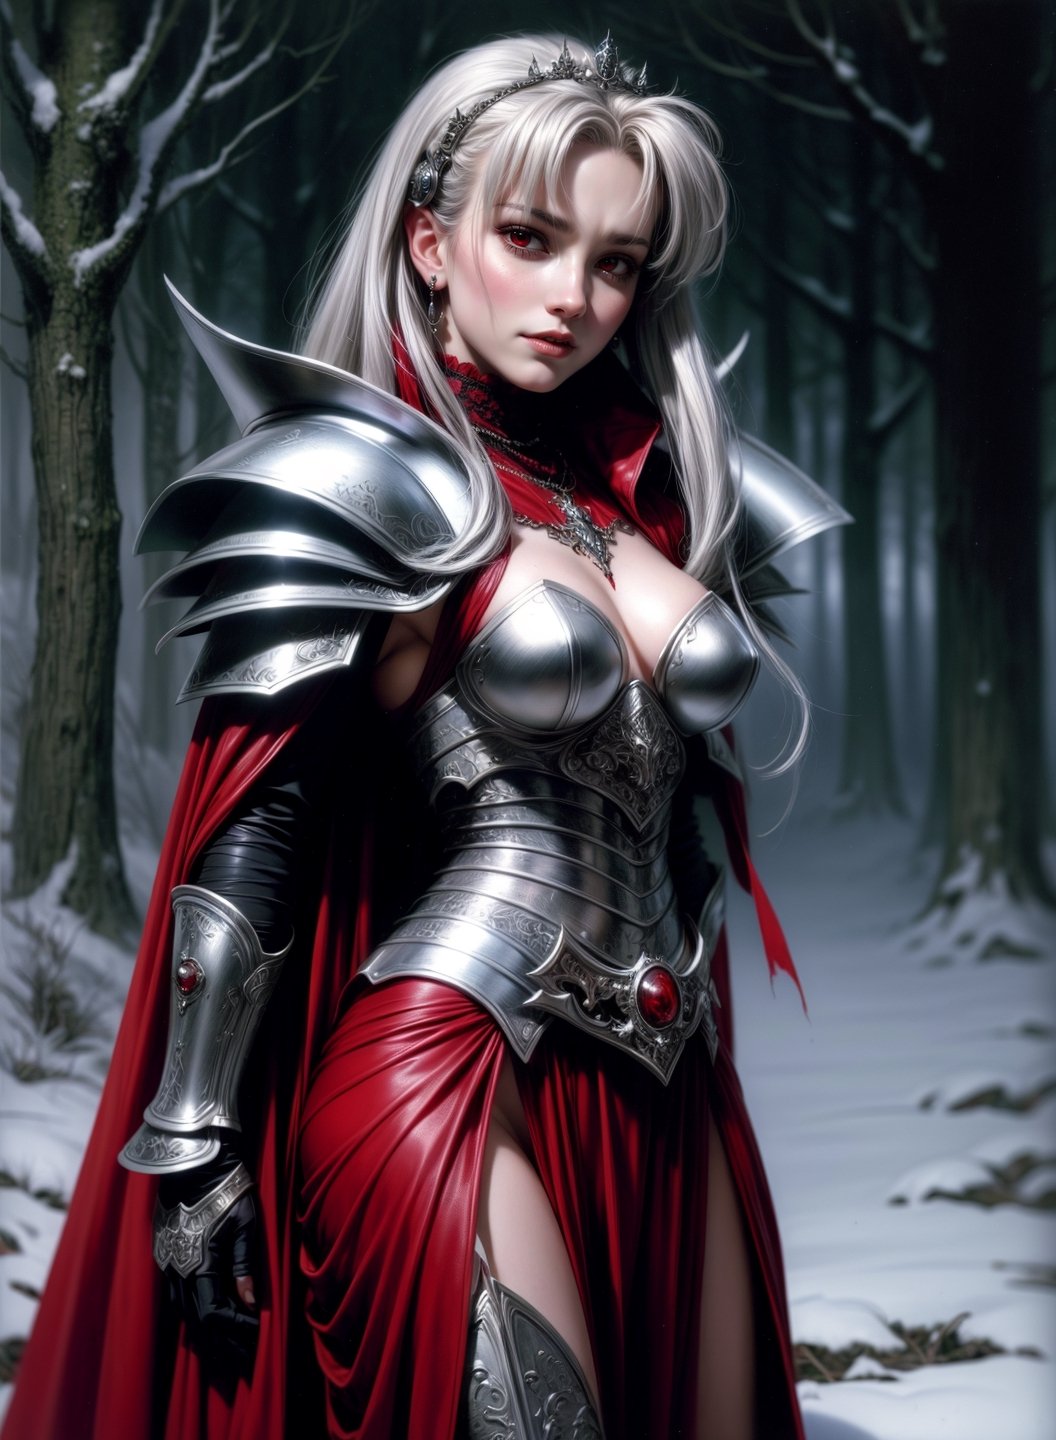 A vampire queen by Luis Royo, intricately ornated silver armor over a fine red leather dress, winter wood background